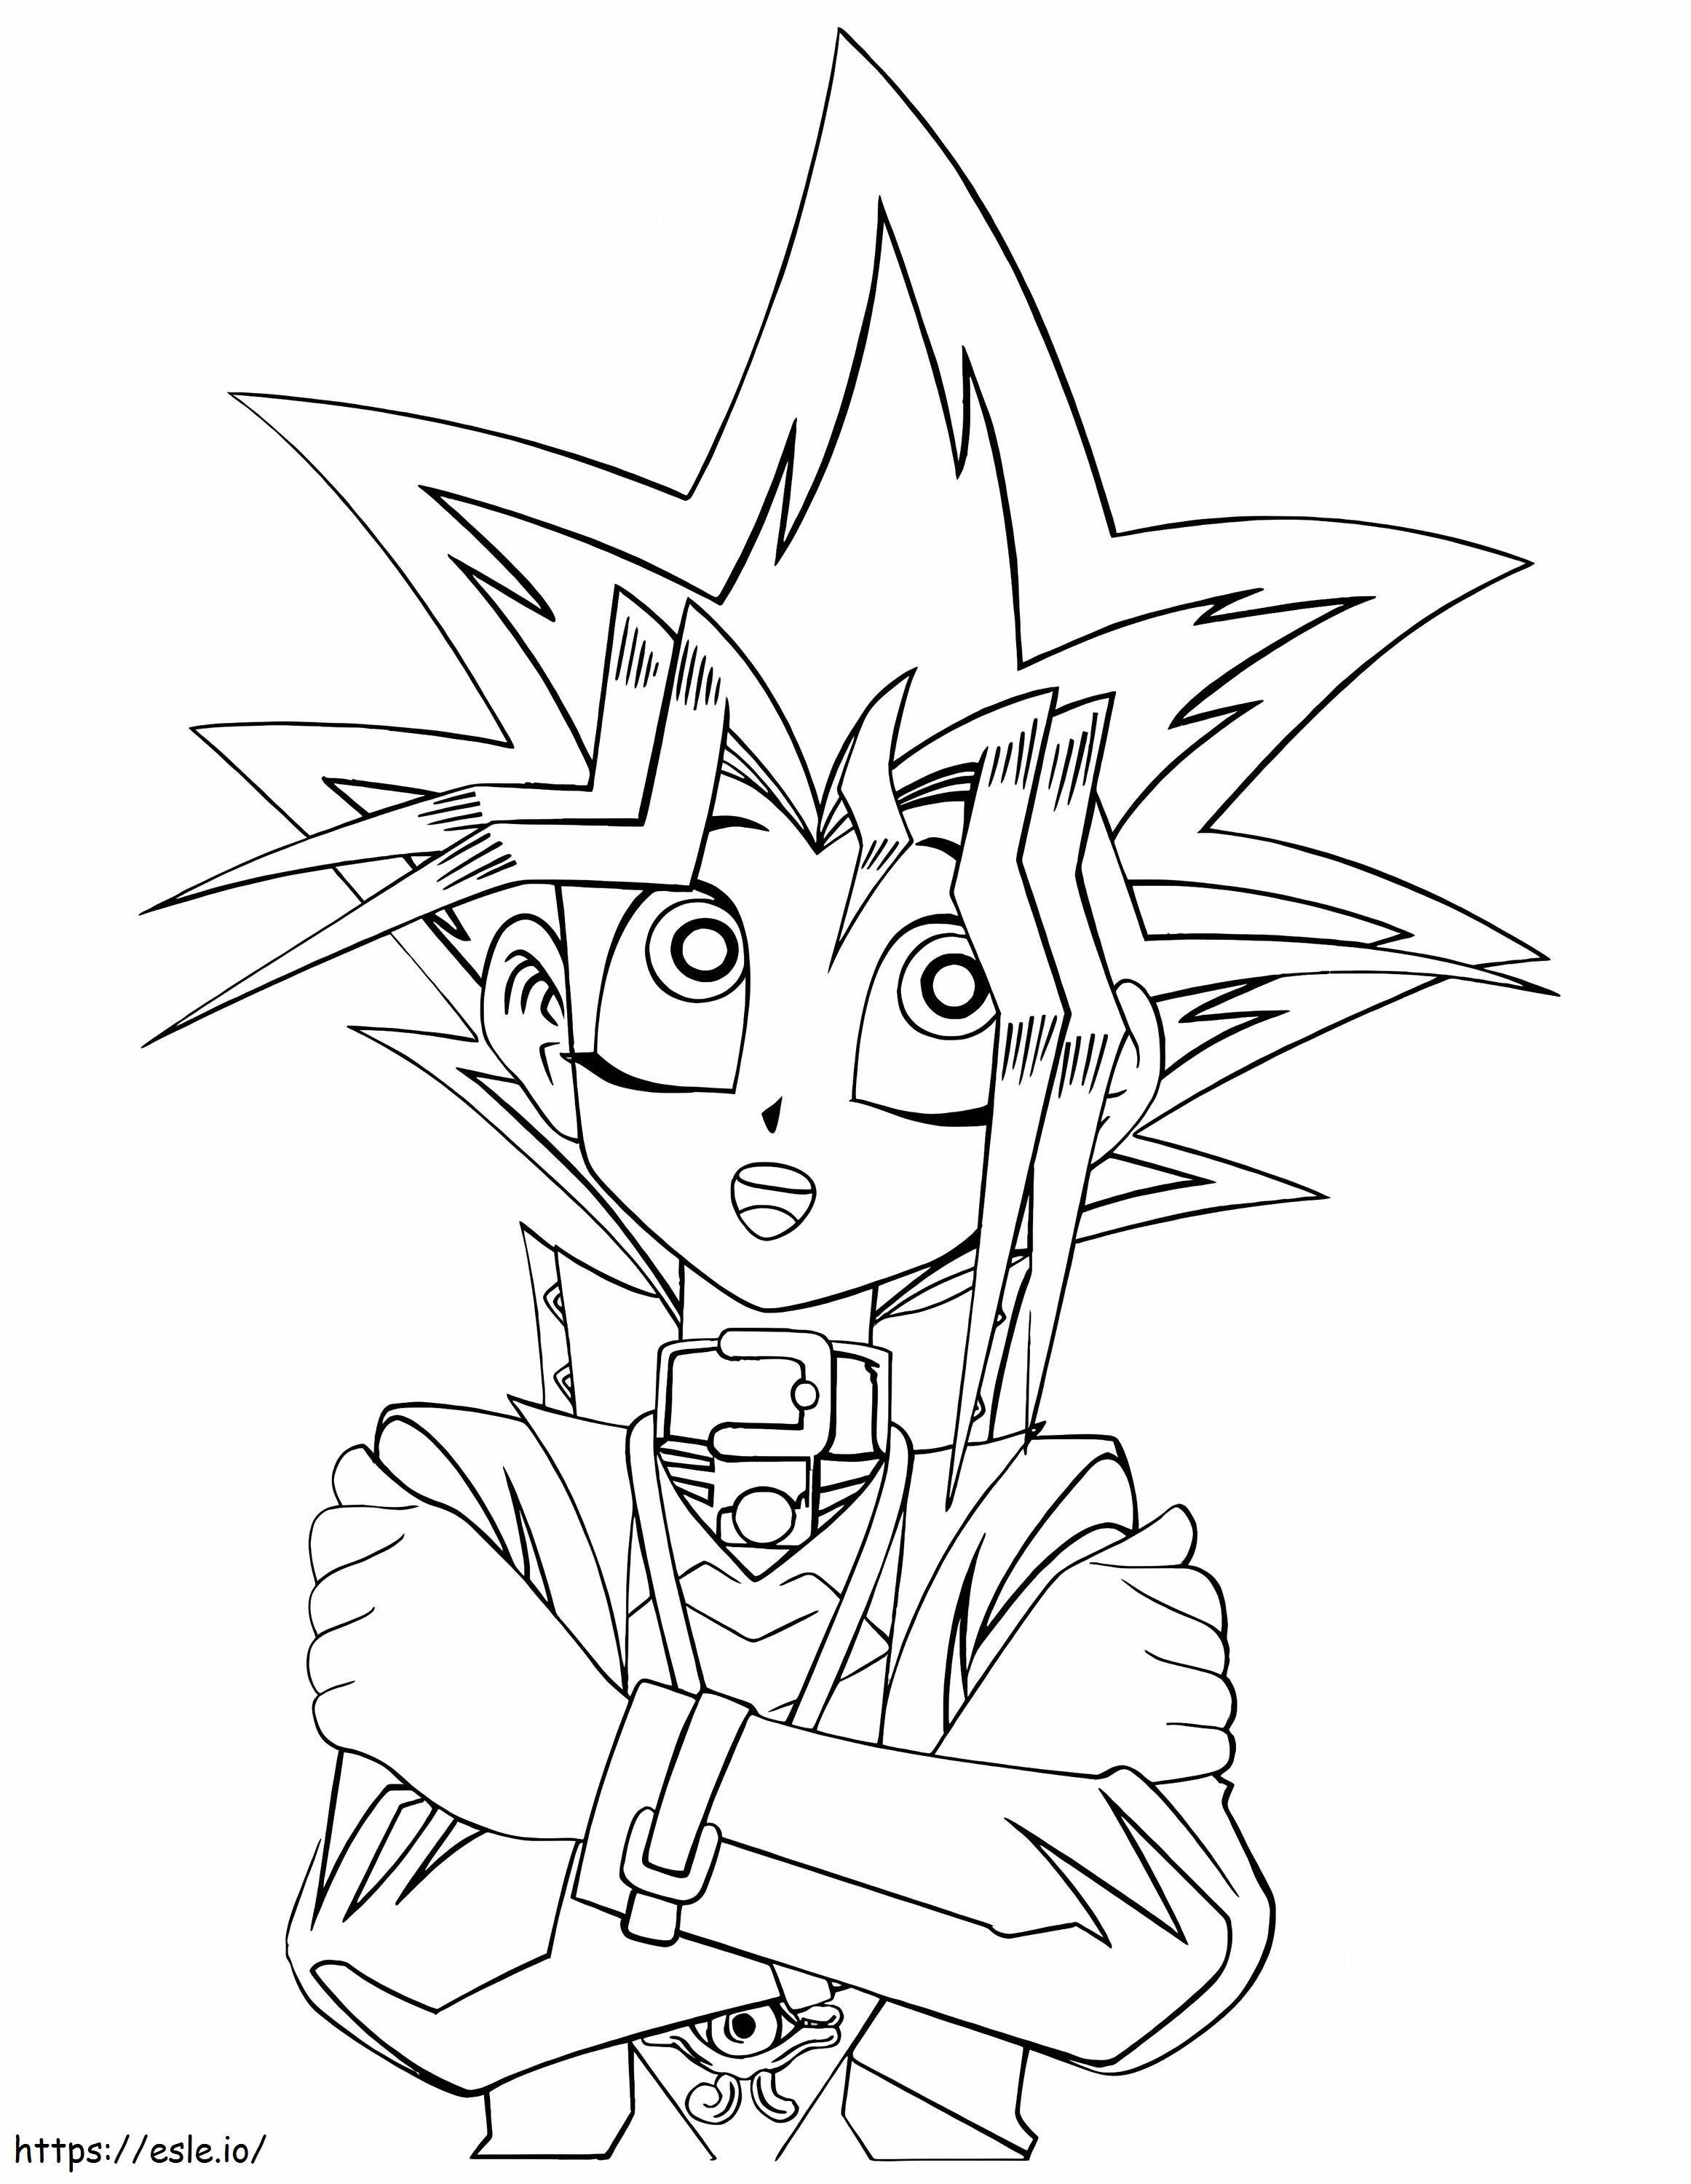 Happy Yu Gi Oh coloring page